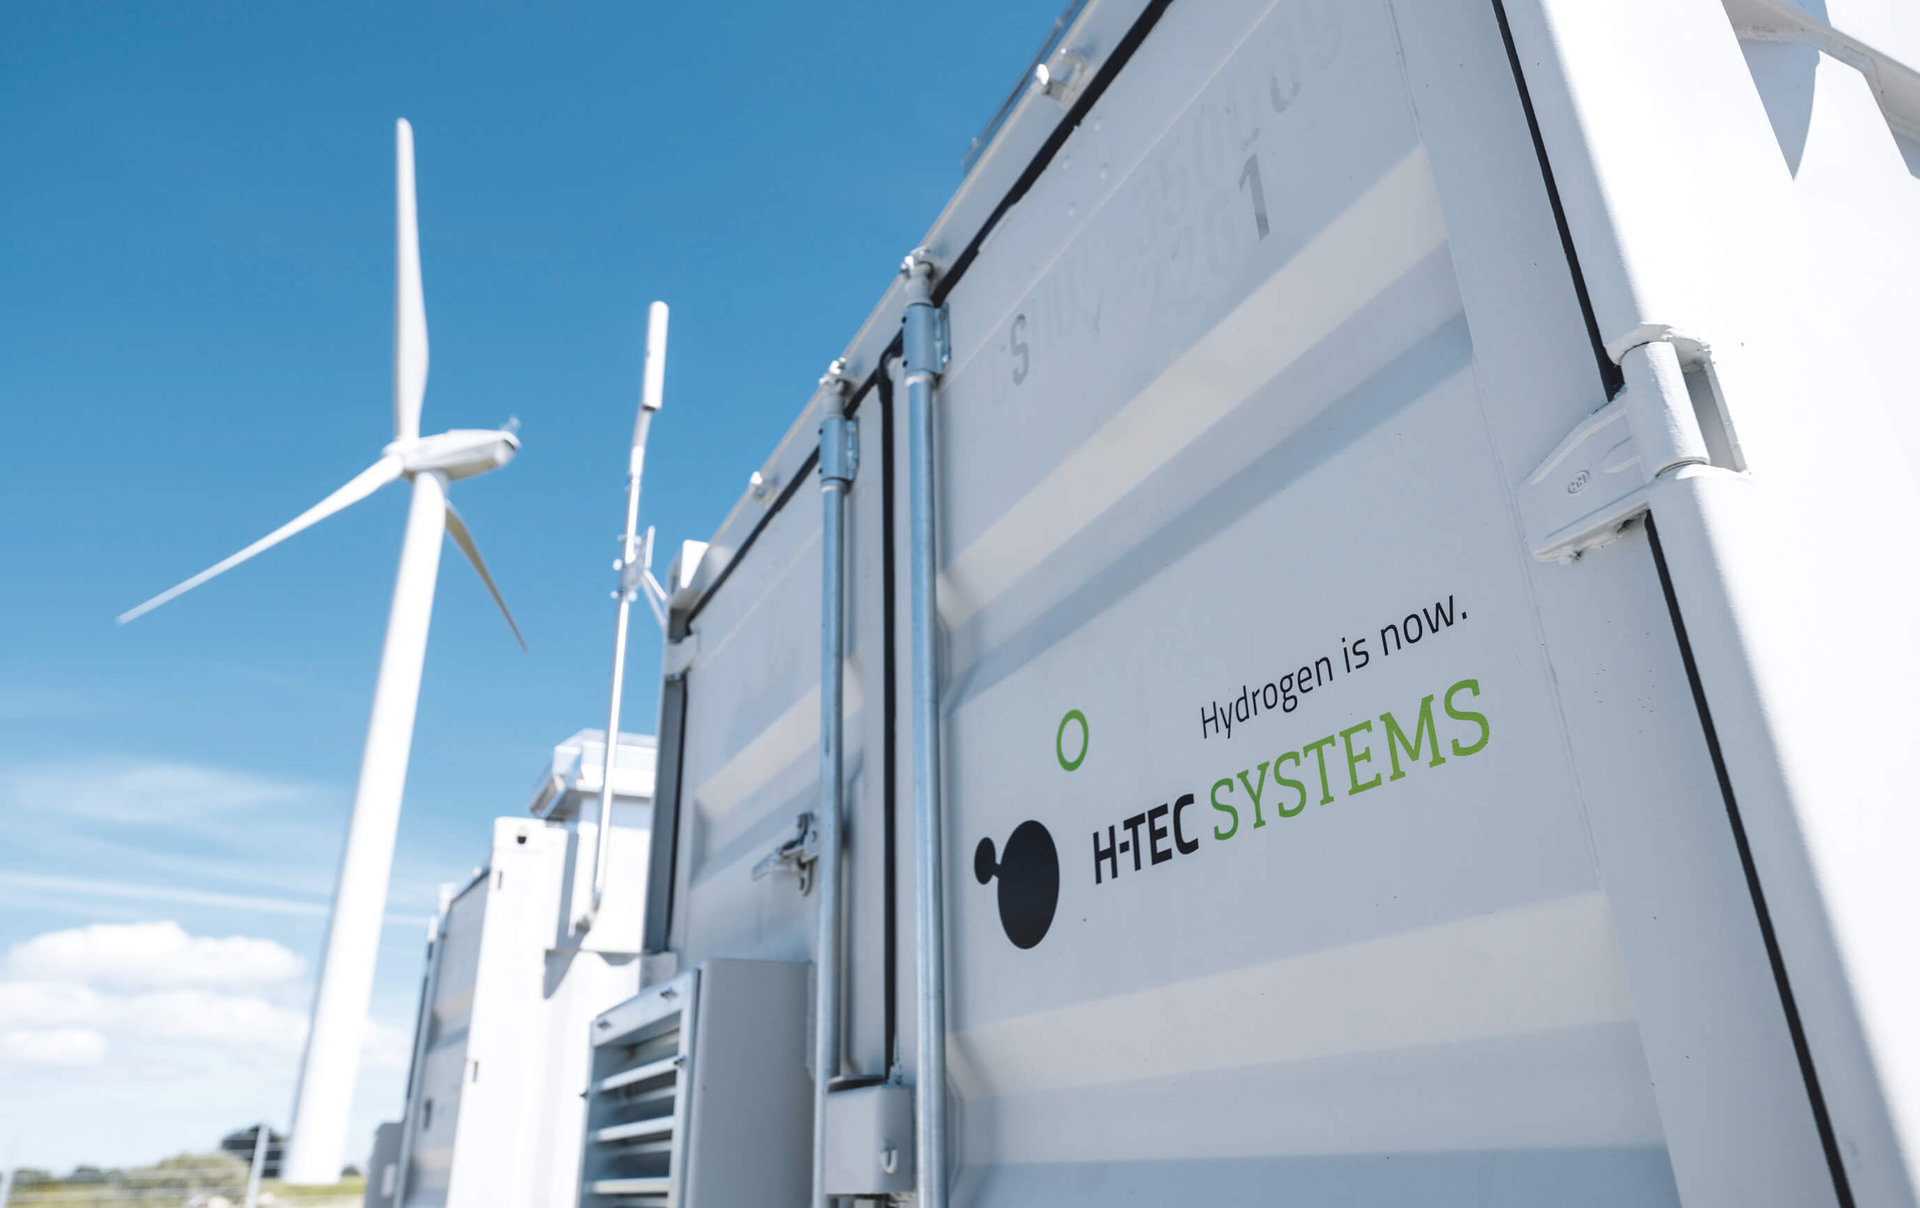 Hydrogen is now: Wasserstofftechnologie by H-TEC SYSTEMS